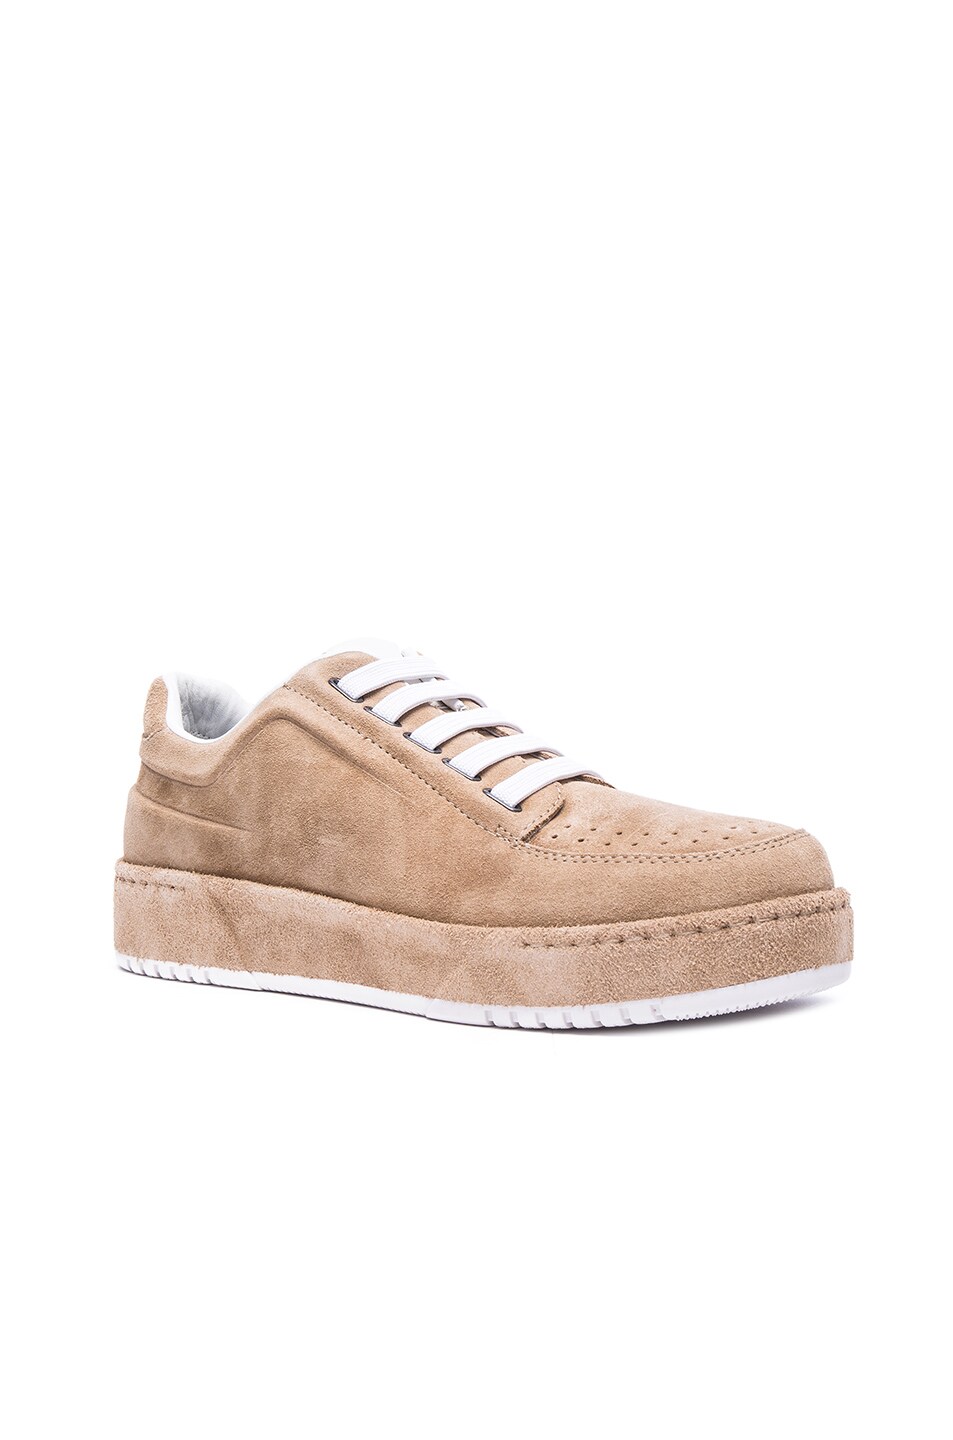 Image 1 of 3.1 phillip lim PL31 Low Top Suede Sneakers in Almond